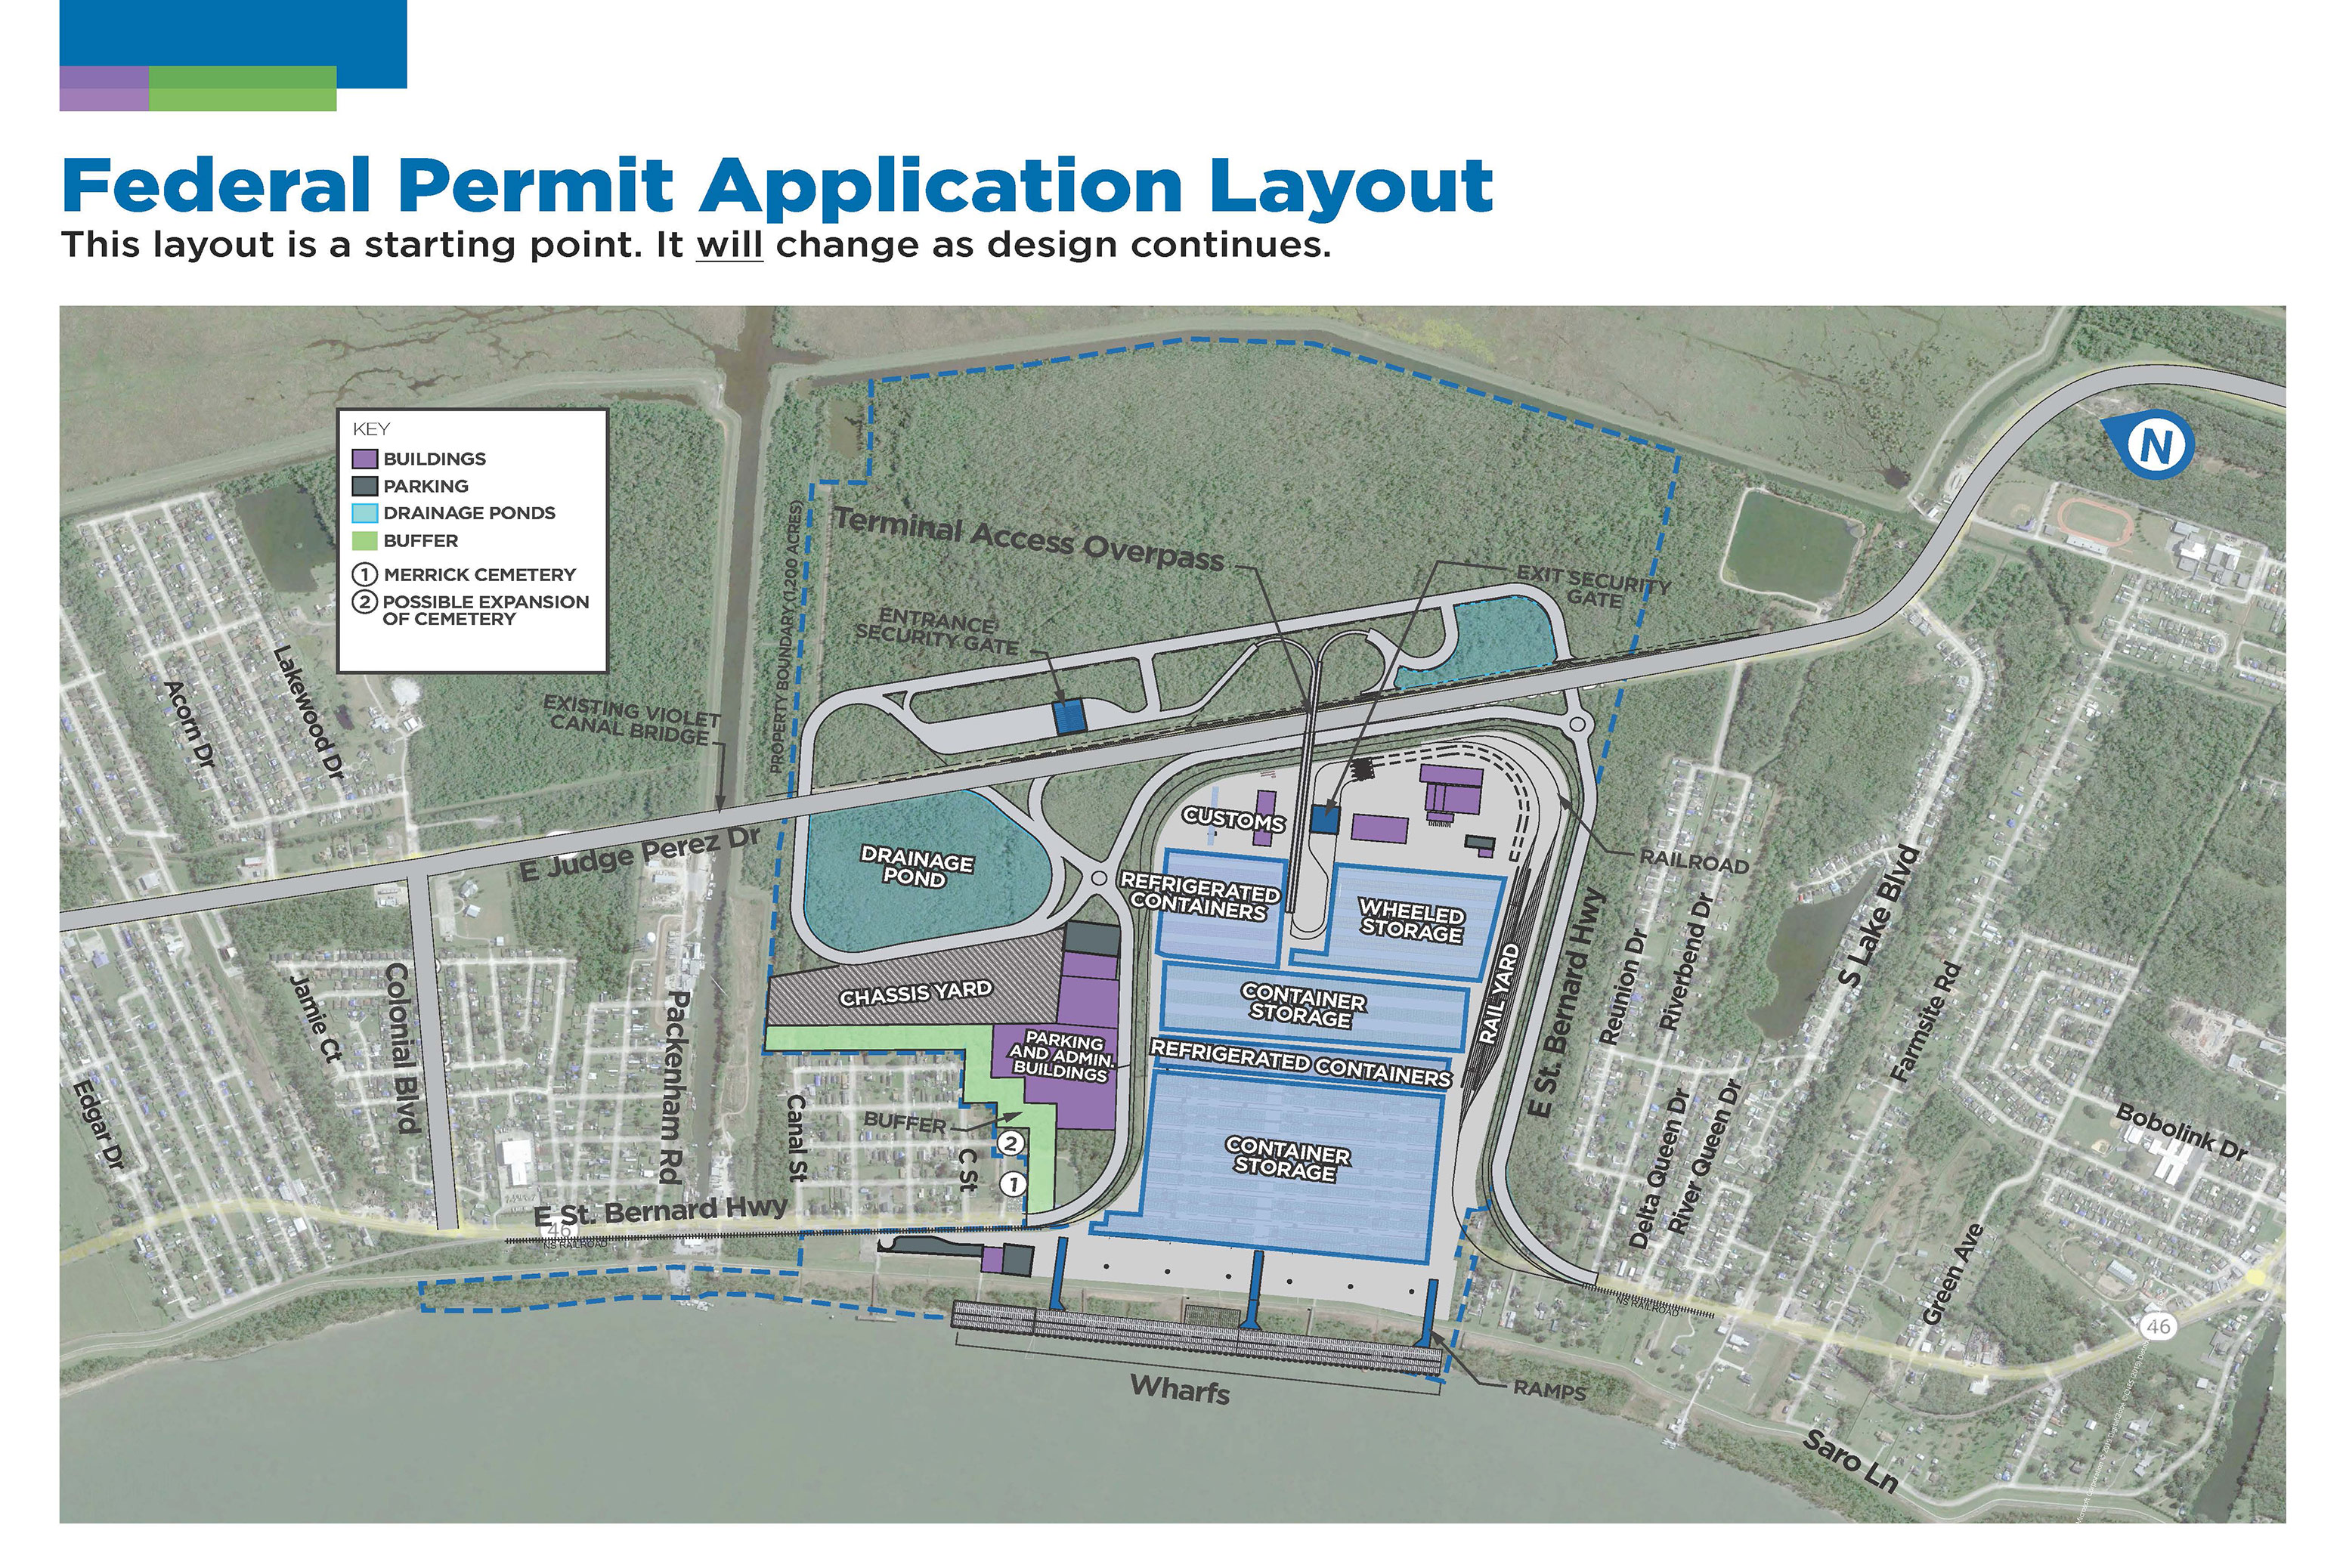 Labeled map of the permit application terminal layout, showing container storage on the terminal, St. Bernard Highway and rail lines looping around the terminal to the east, a buffer area separating the terminal from residential neighbors, drainage ponds near Judge Perez Drive, and access roads on Judge Perez Drive.